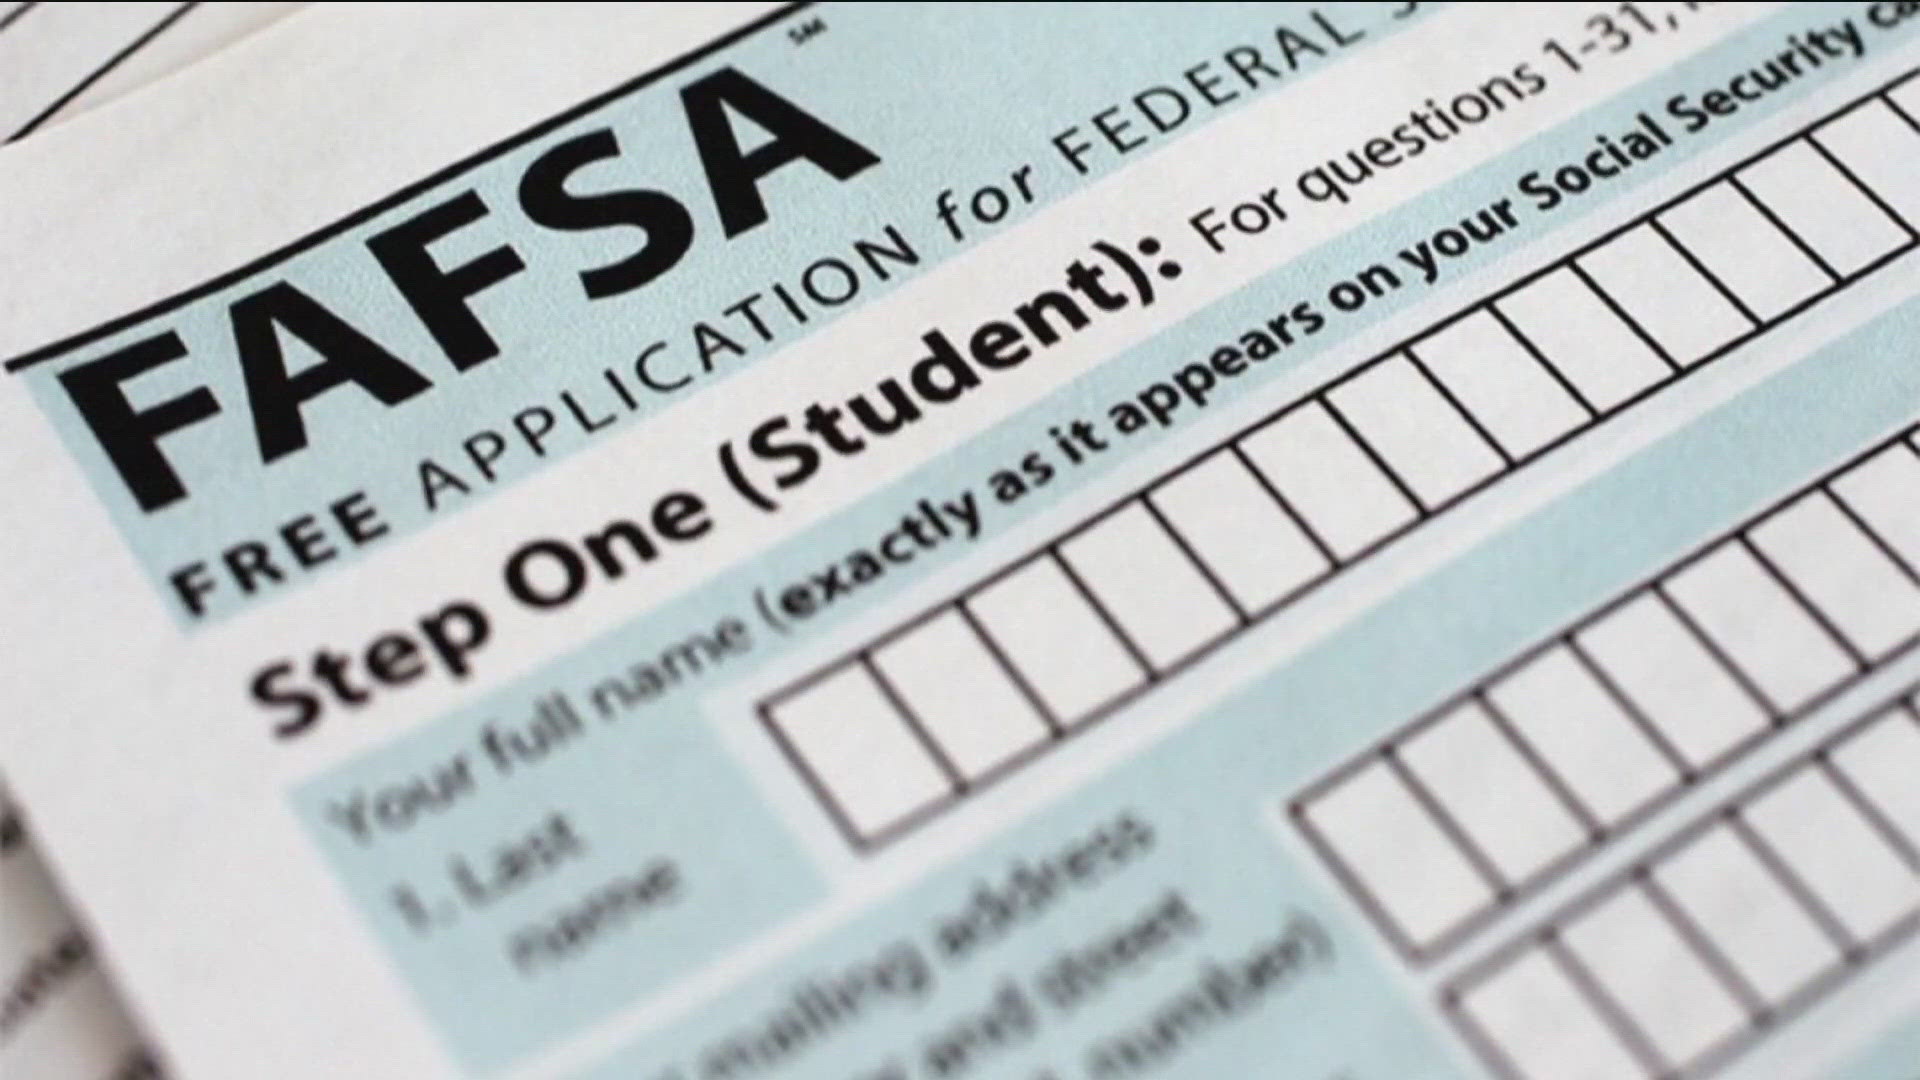 Colleges and universities across the country won't receive financial aid applications until mid-March.